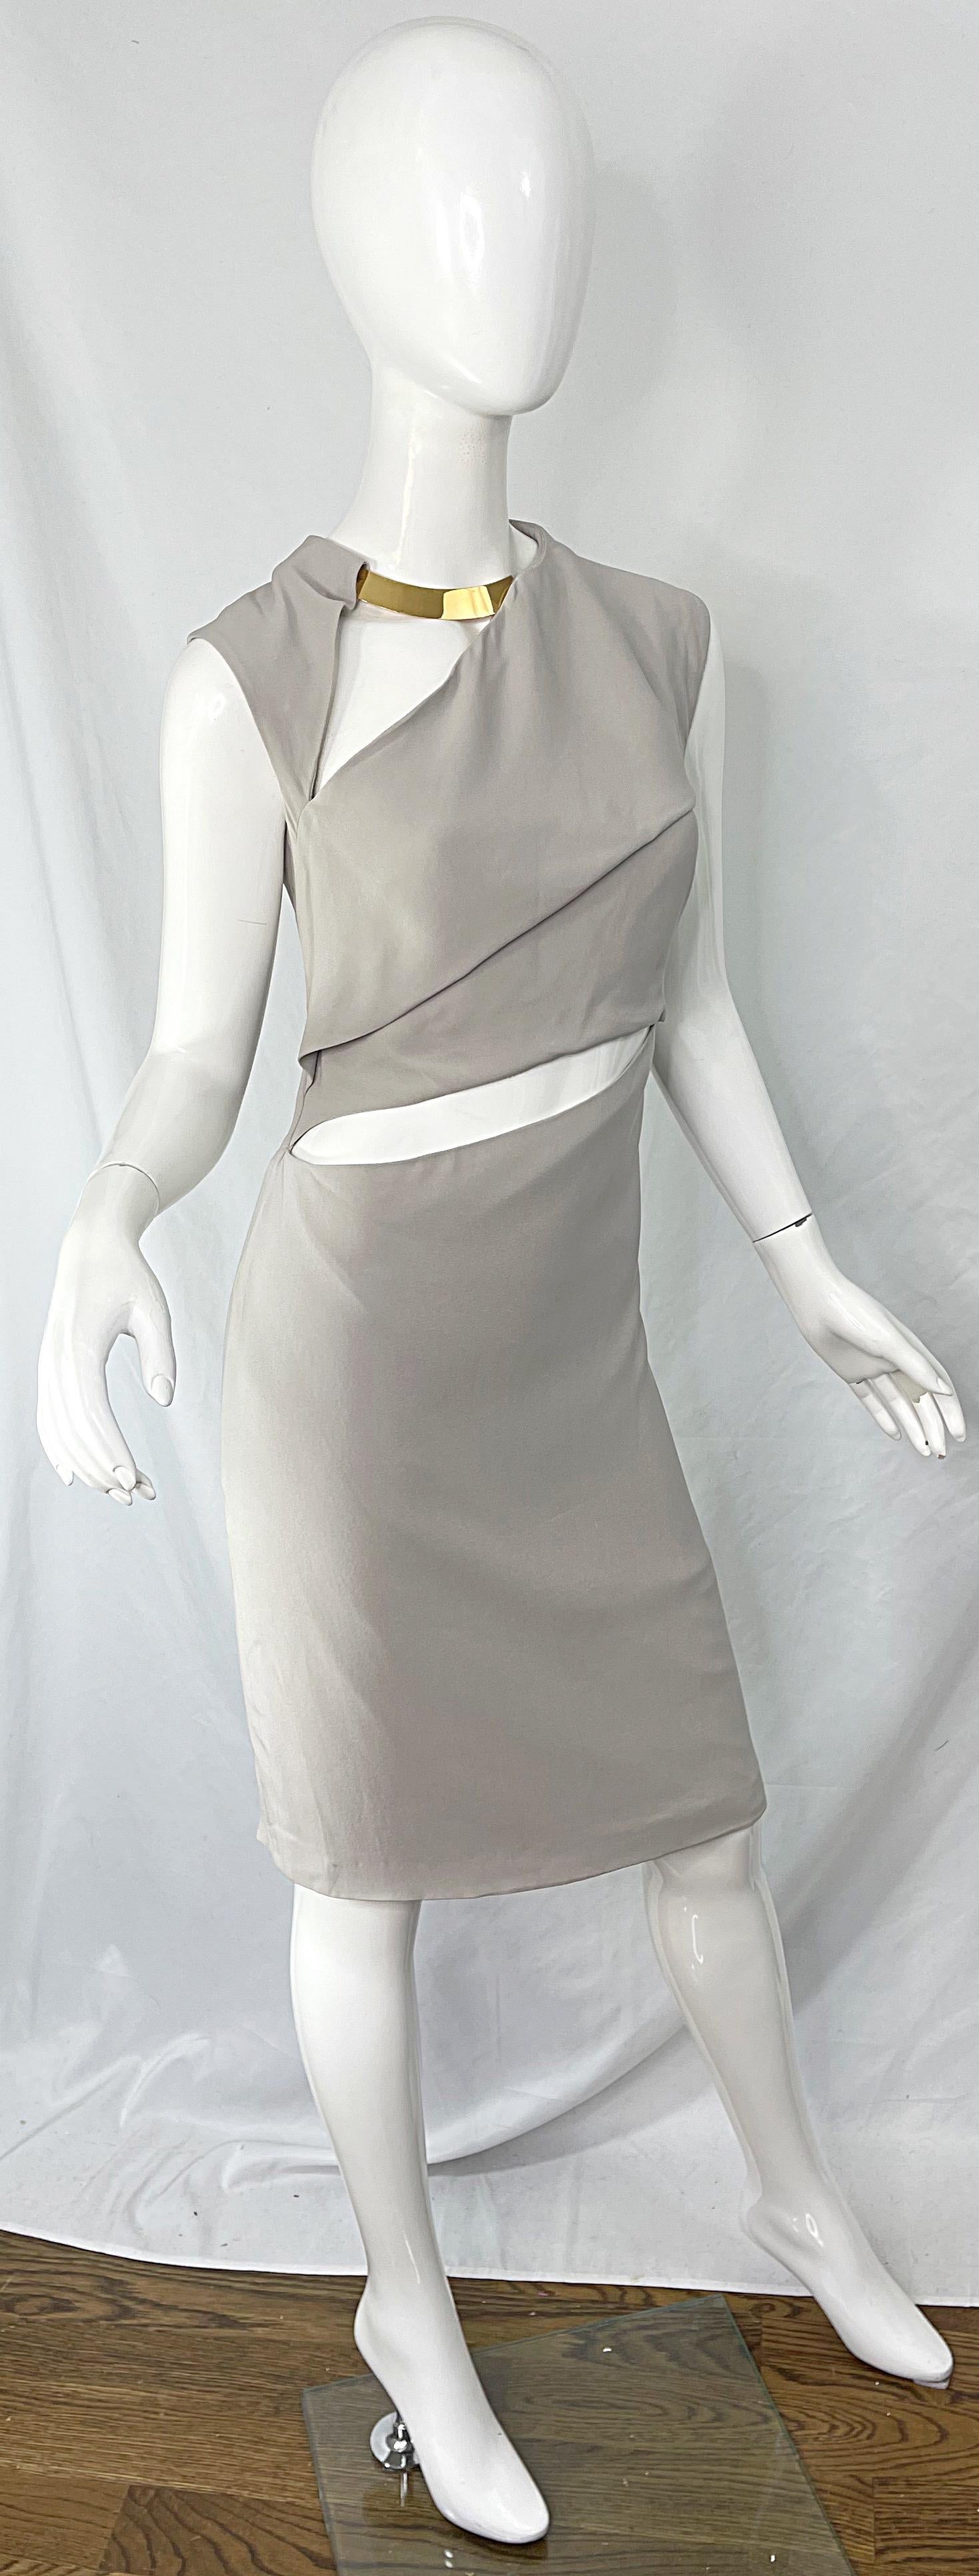 Gucci Fall 2010 Runway Size 48 / US 12 Khaki Nude Tan Gold Cut Out Silk Dress  For Sale 2